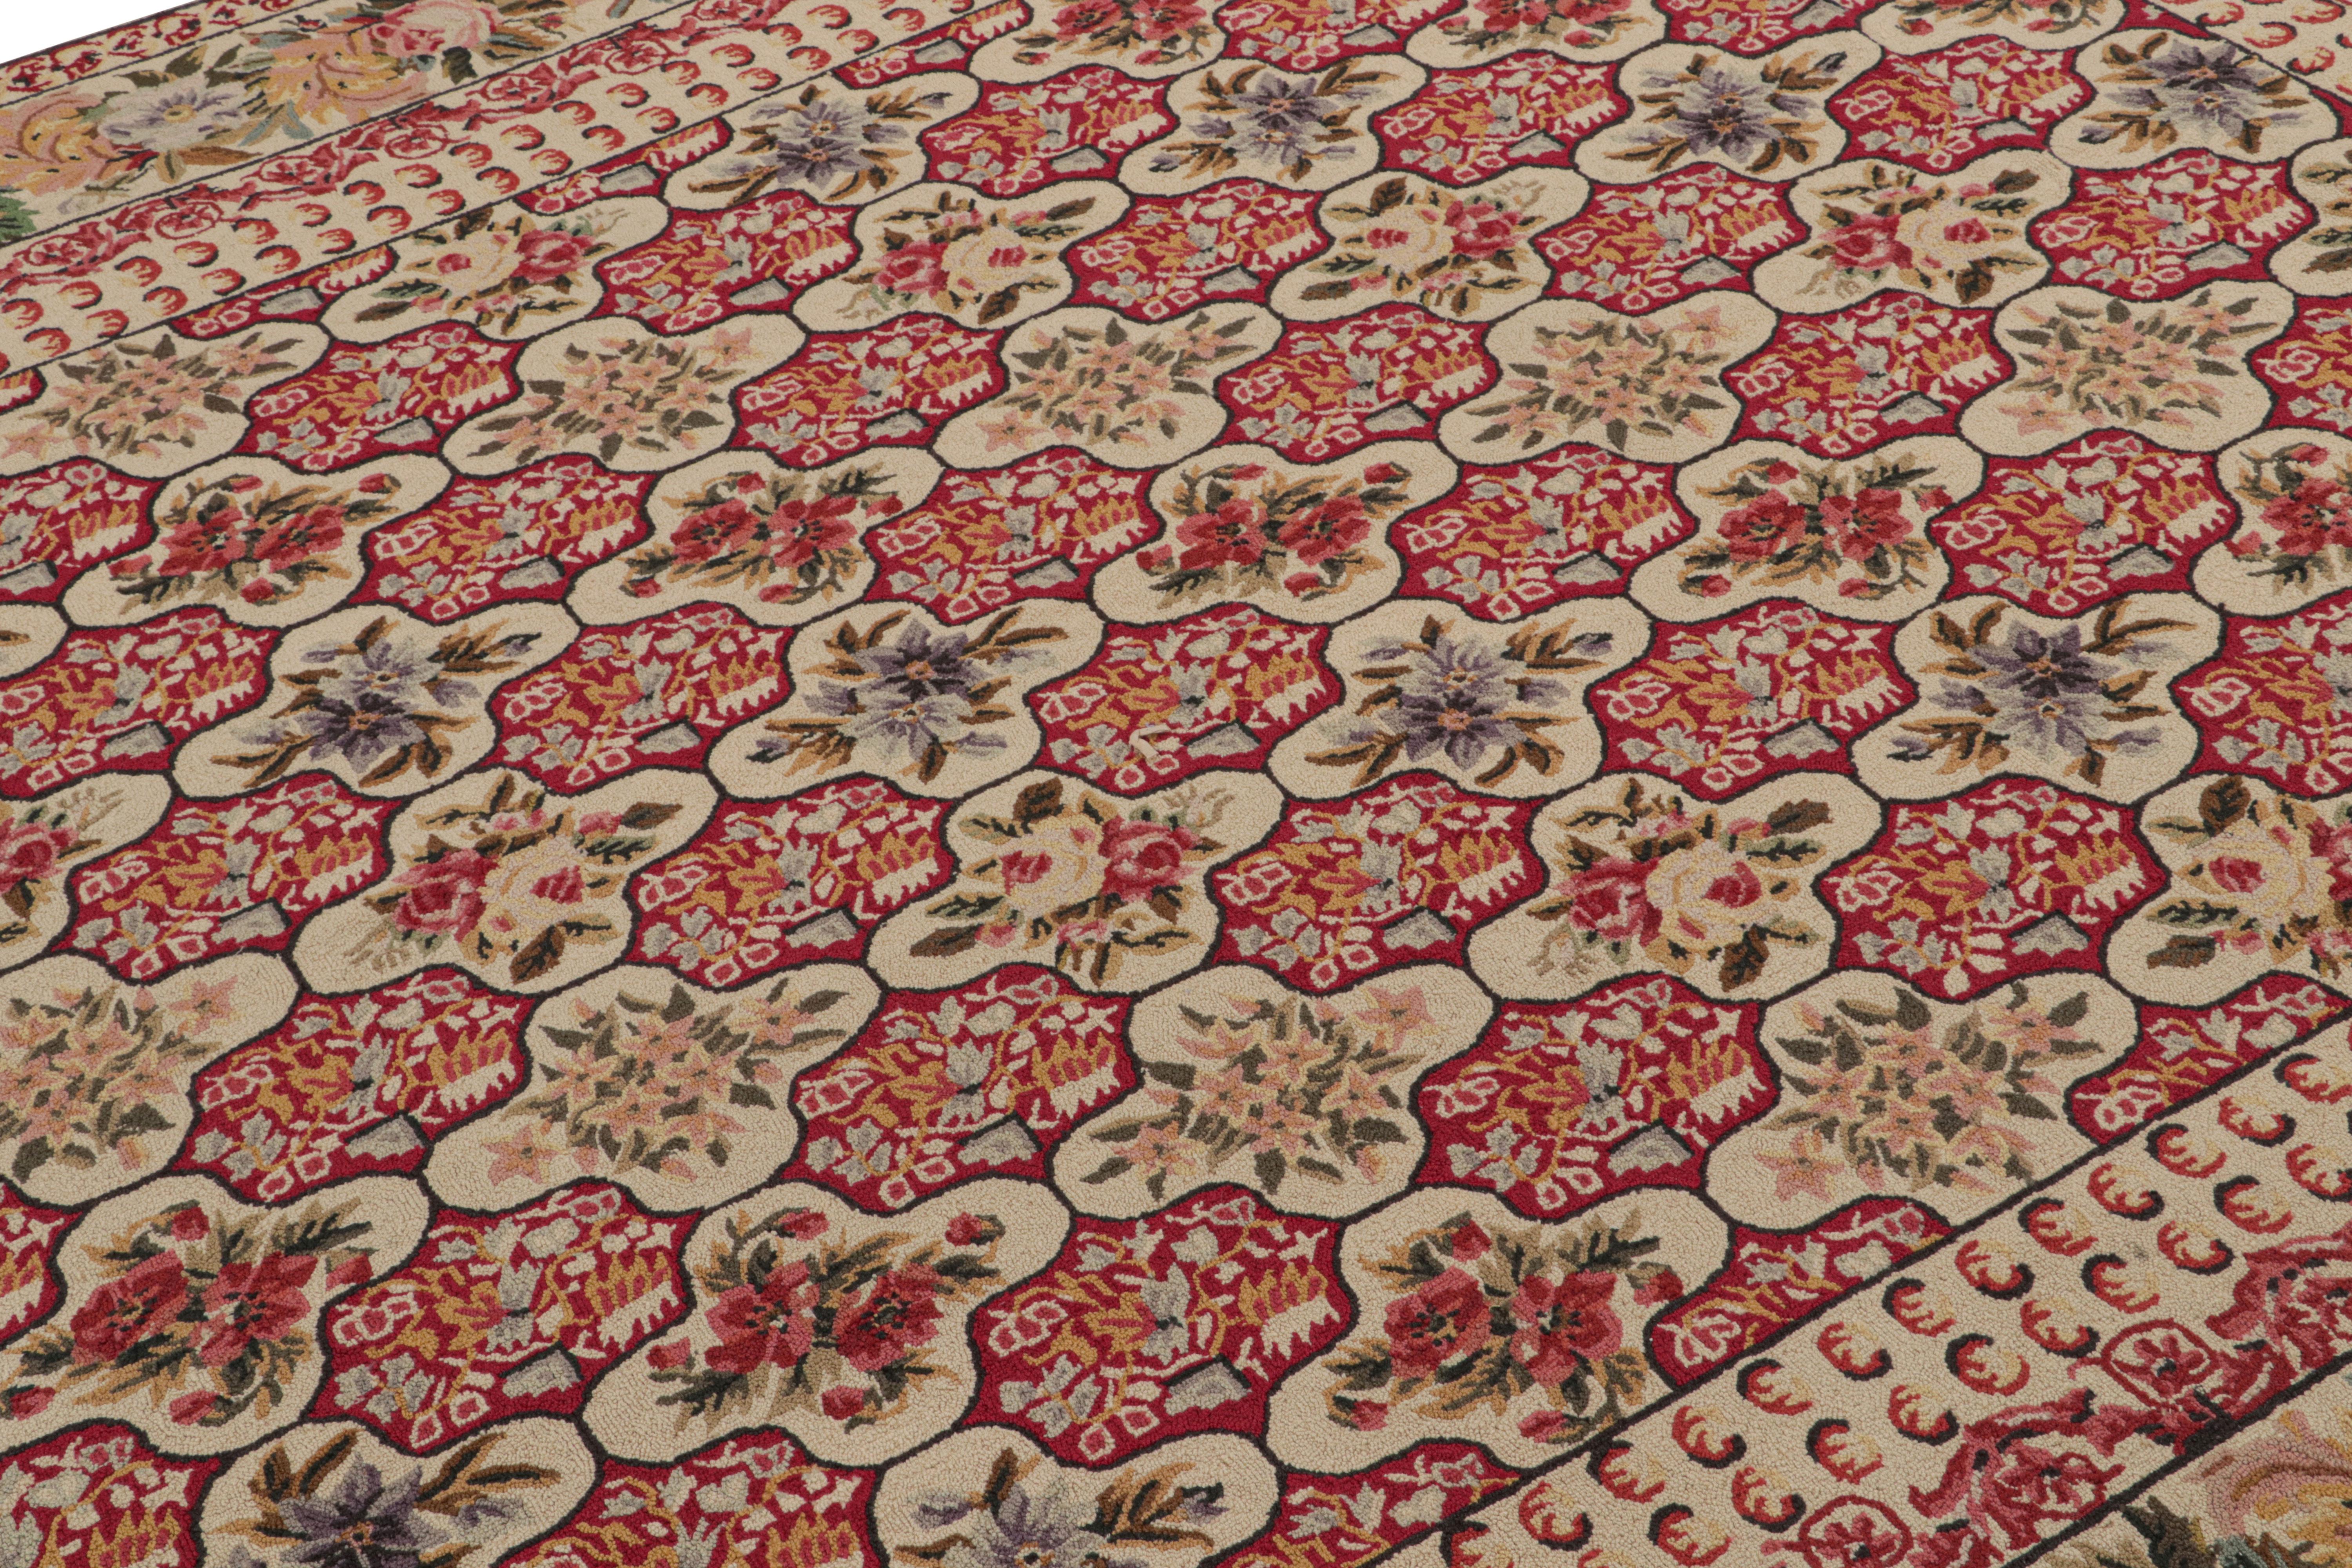 Hand-Knotted Rare Antique Hooked Rug with Red & Beige Floral Patterns, from Rug & Kilim For Sale